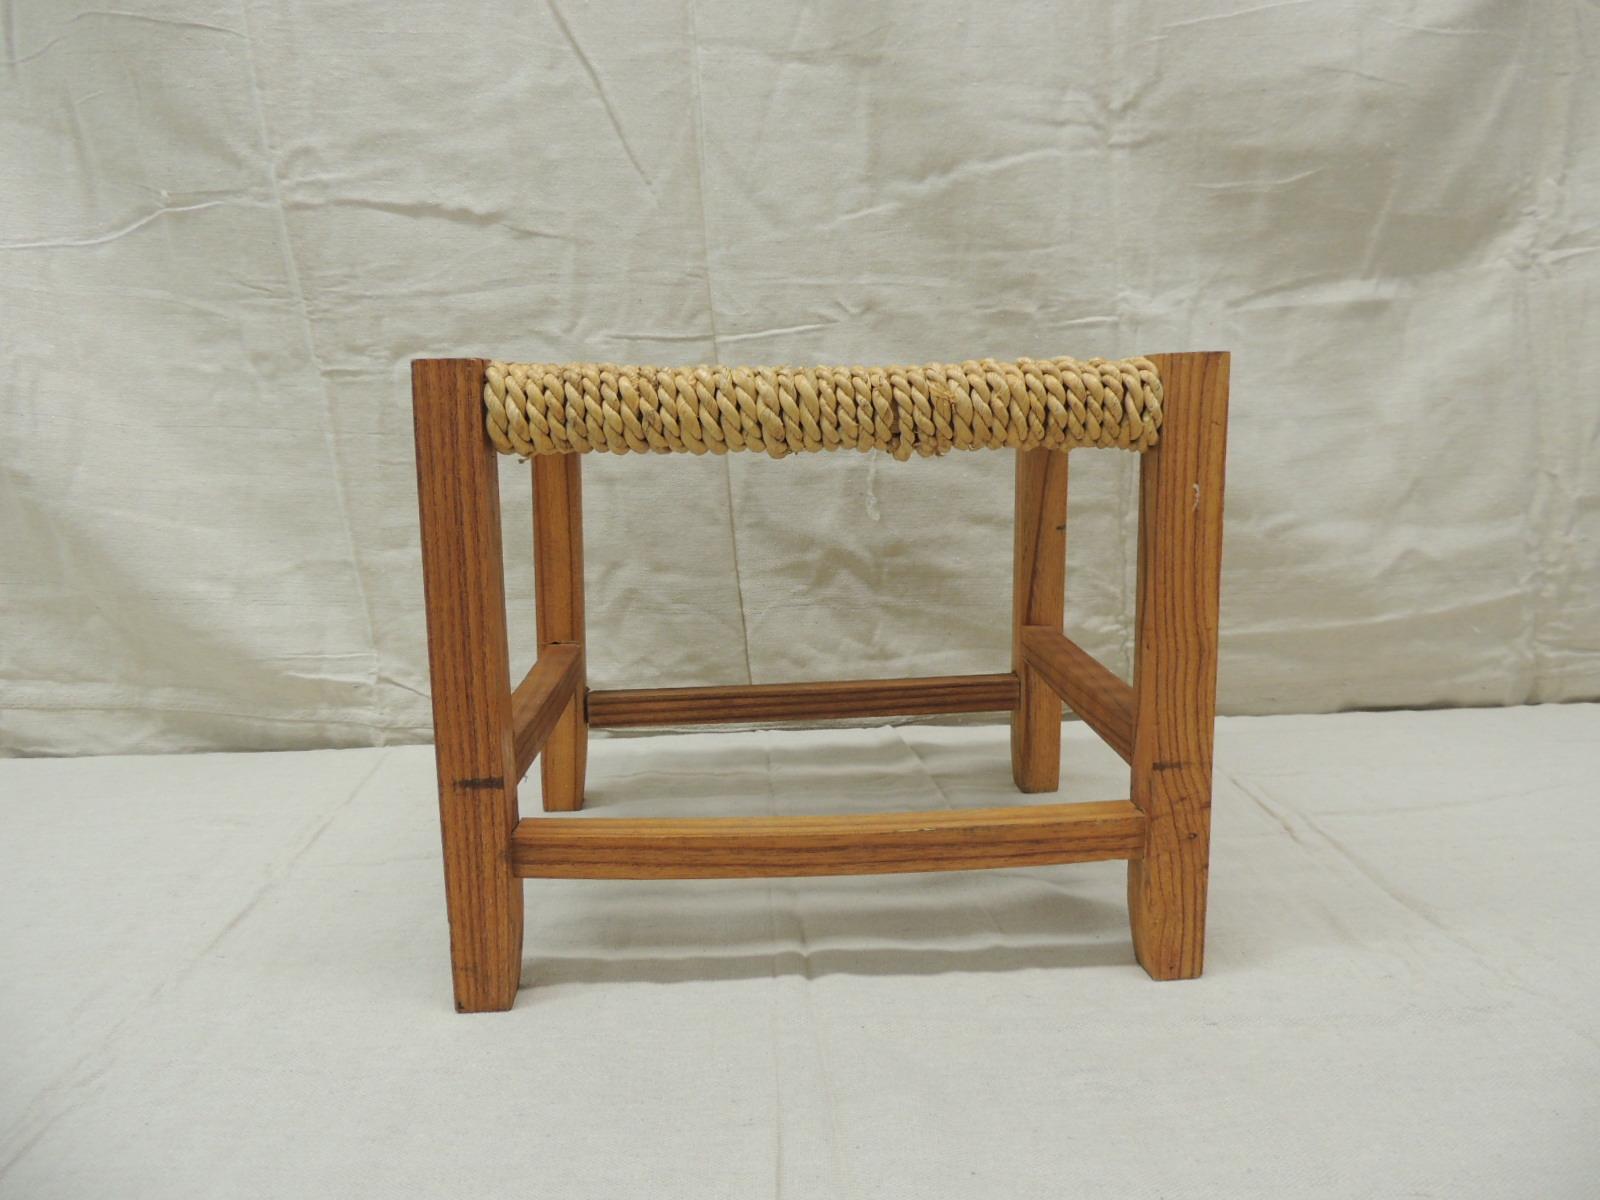 Vintage rectangular Shaker style footstool with seagrass woven seat
Stool has 4 wood squared legs with 4 square stretchers
Americana style with the center of the seat with an intricate braided designed fiber arts
Honey color. Organic. aka Rush